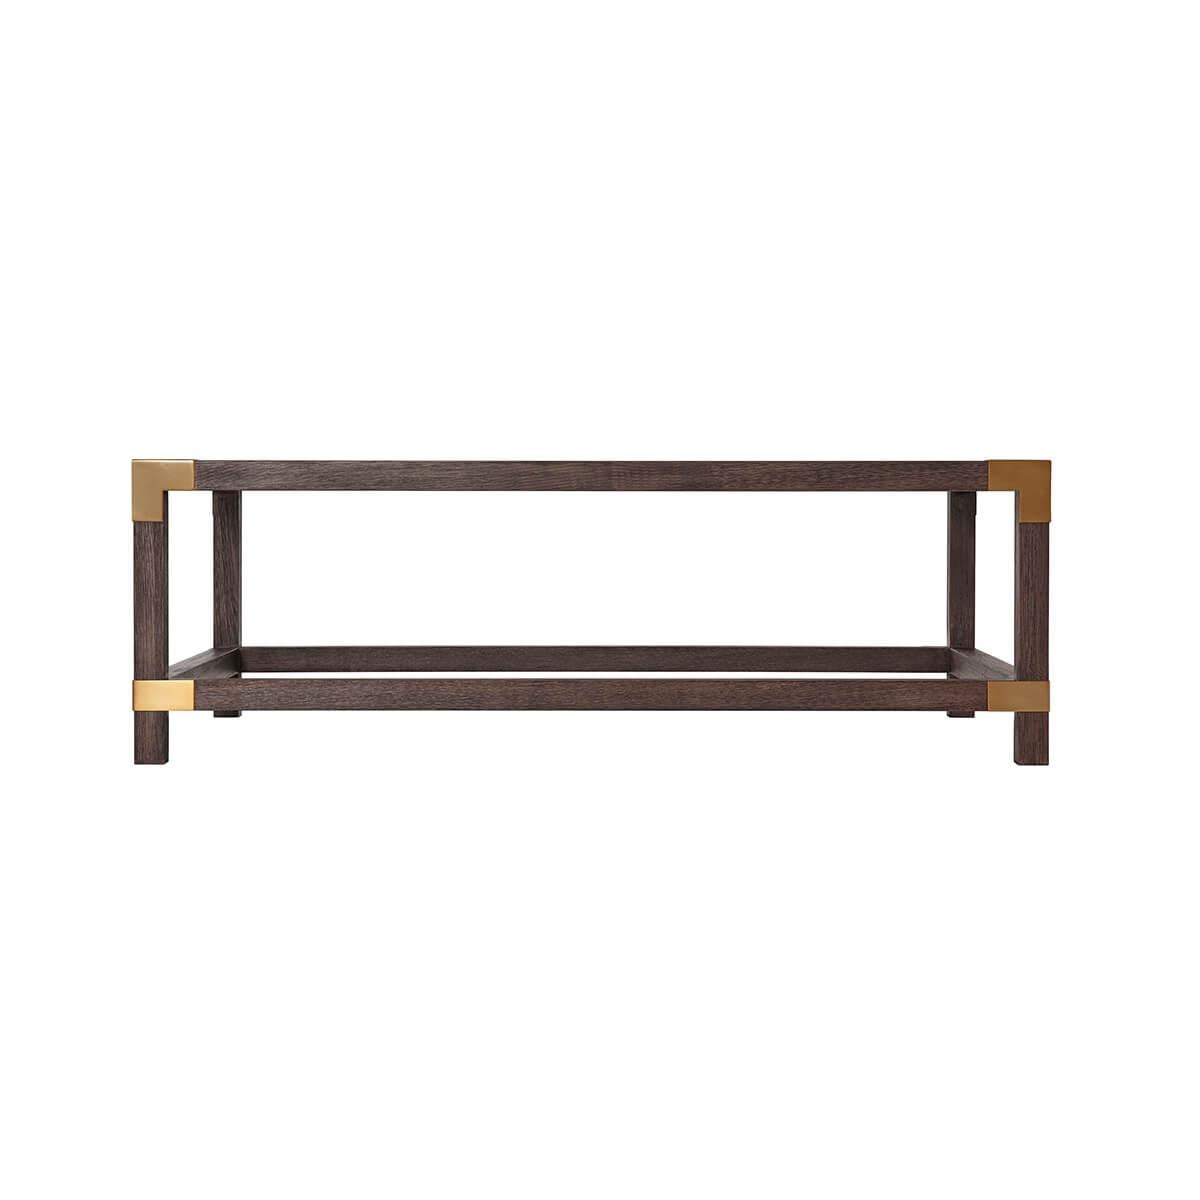 With a solid textured beech frame in a dark Cardamon finish, with brushed brass corners. With an inset tempered glass top with a stretcher base.

Dimensions: 54